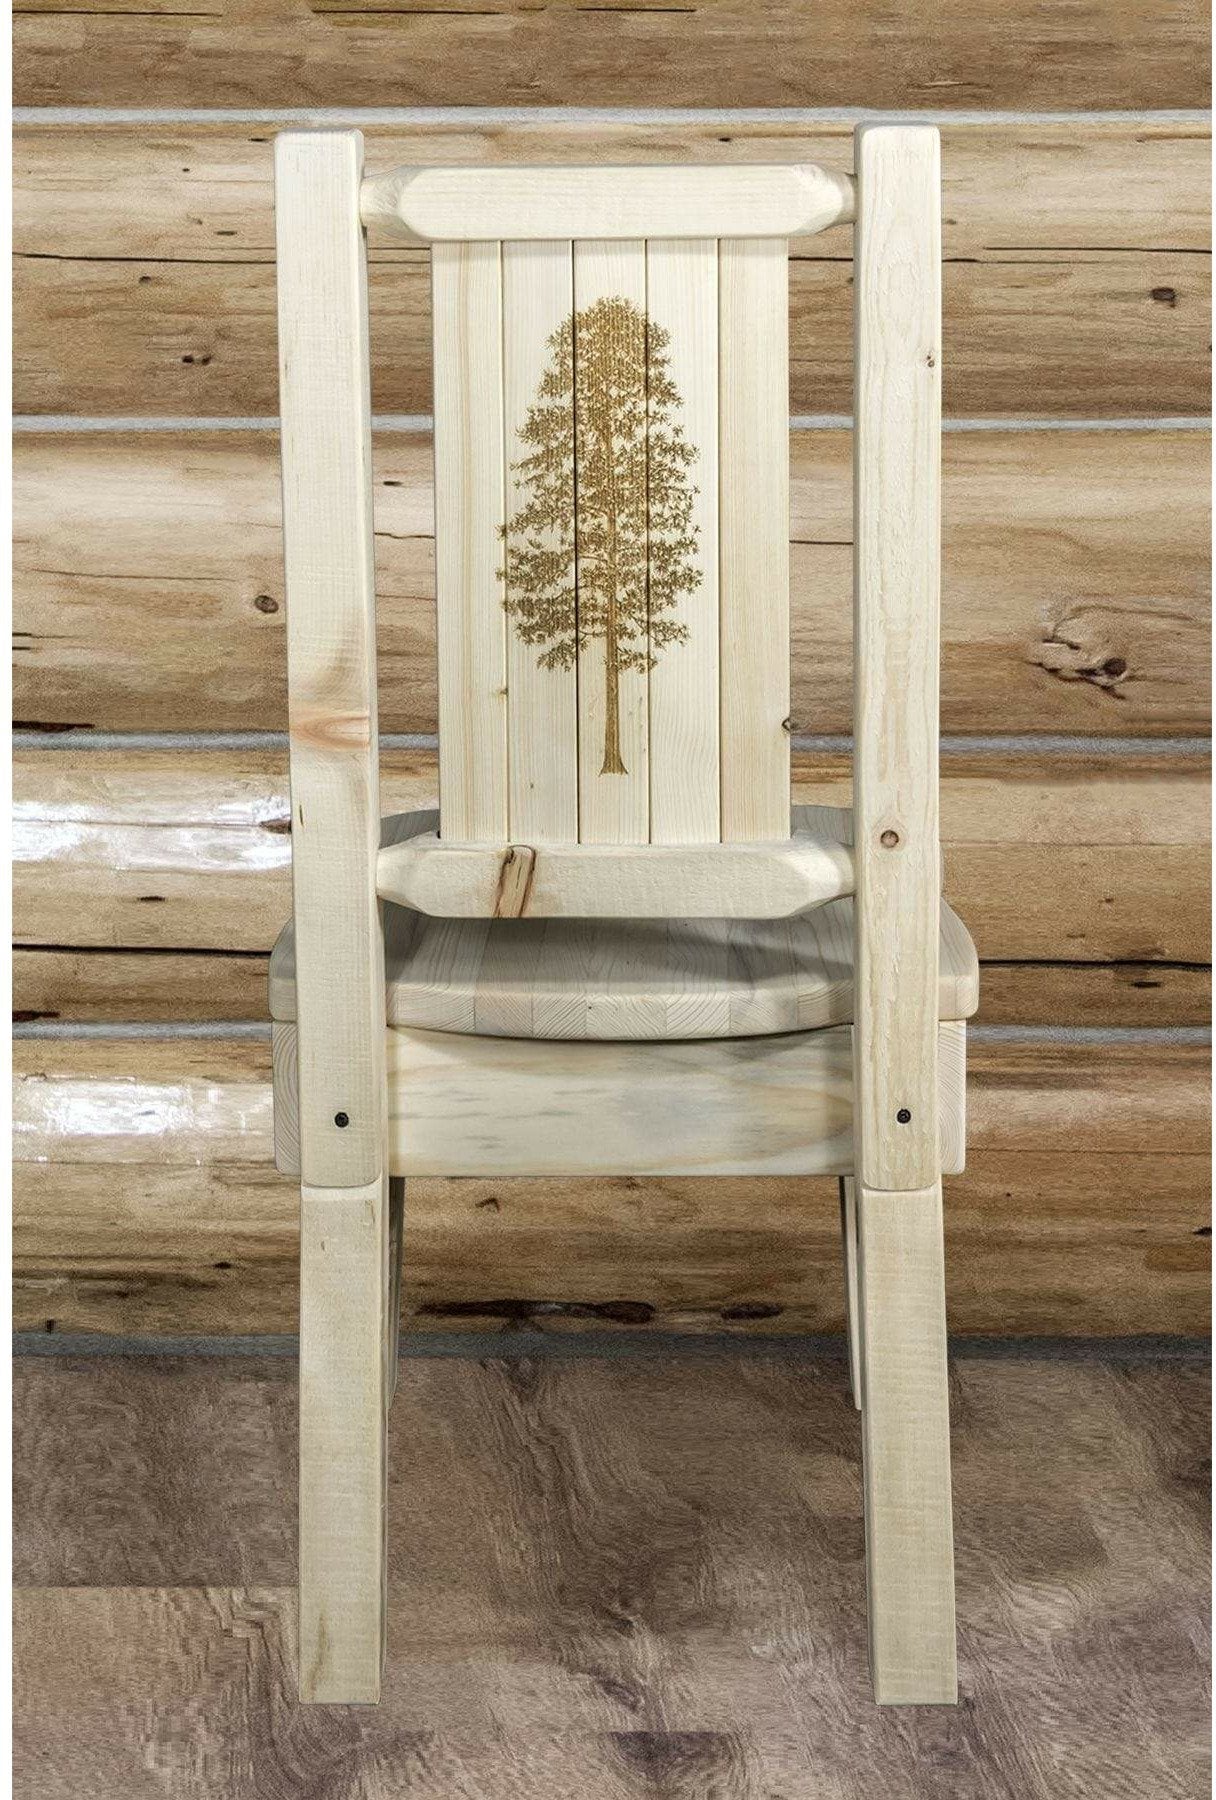 Montana Woodworks Homestead Collection Side Chair with Laser Engraved Design - Ready to Finish-Rustic Furniture Marketplace